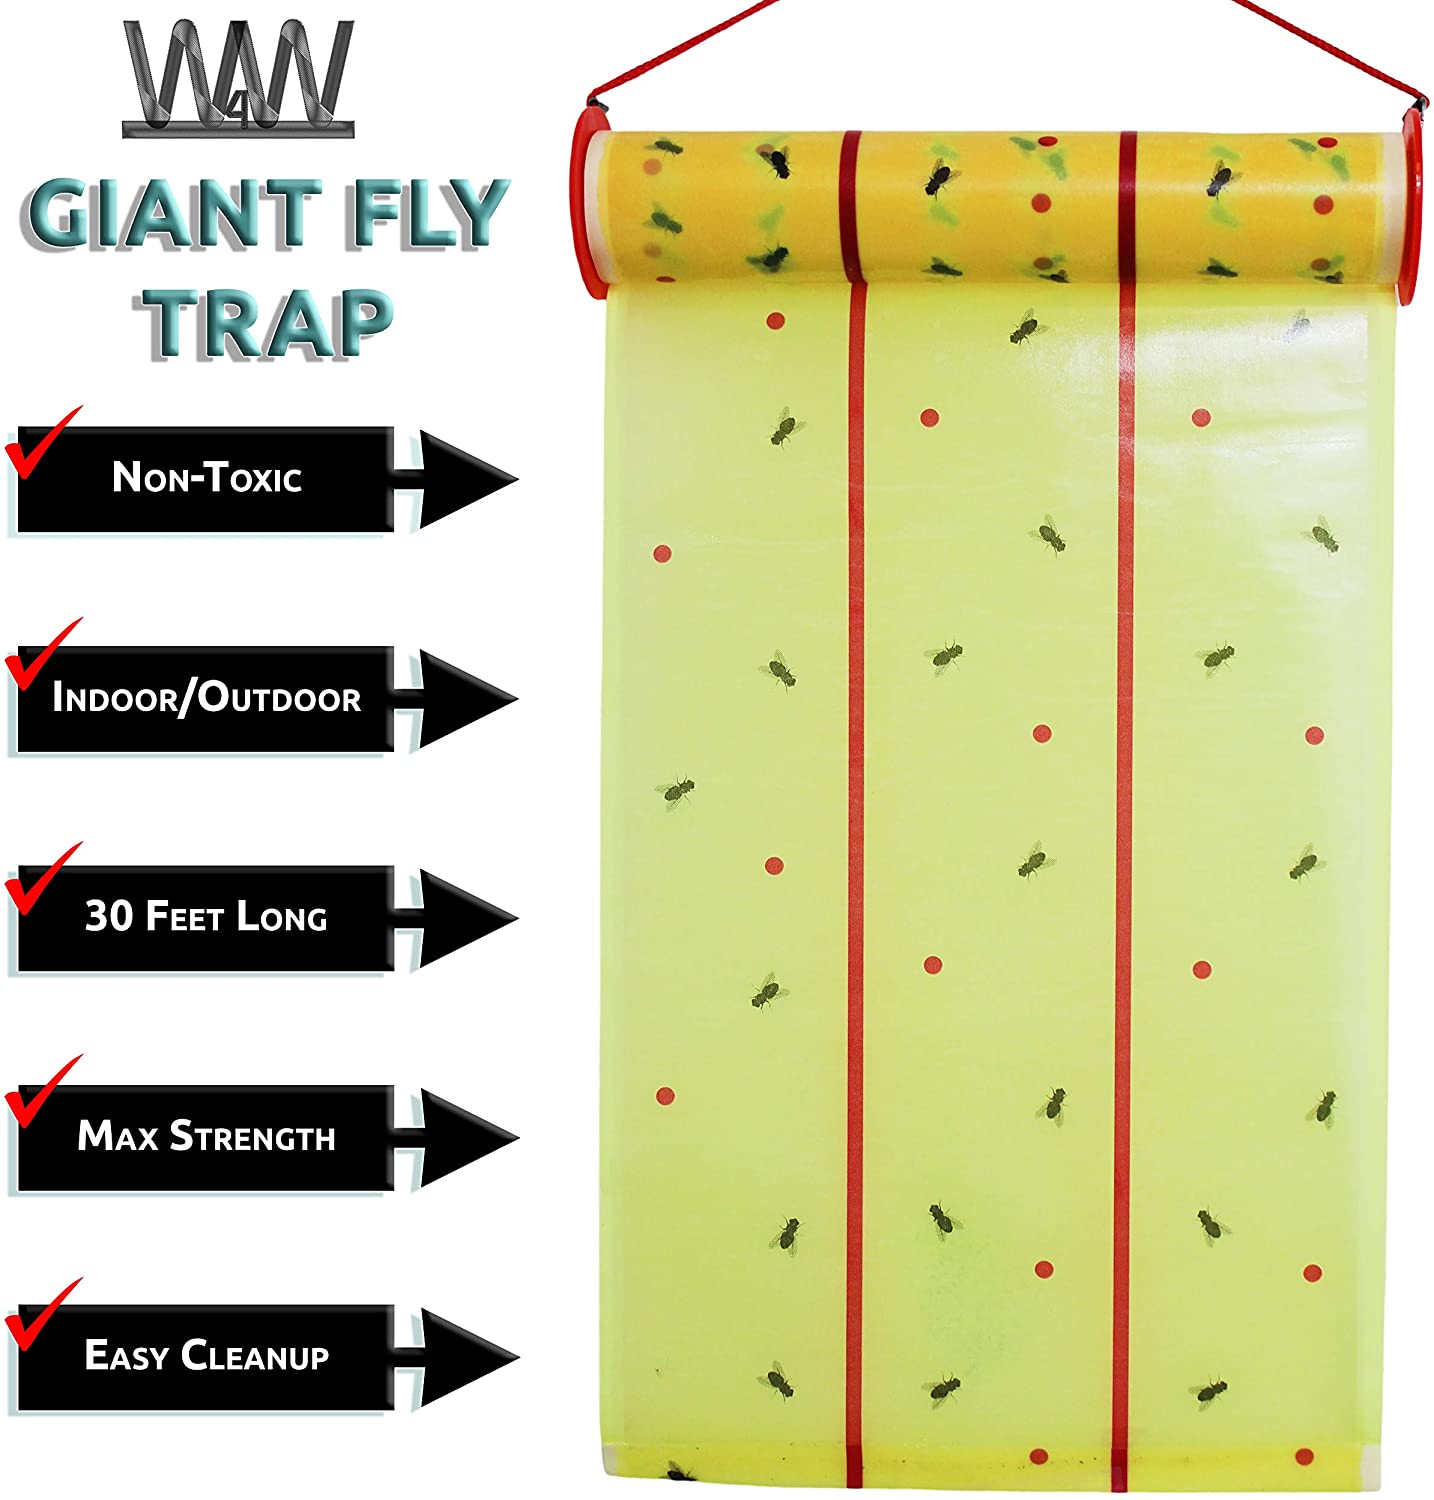 W4W Giant Fly Trap Roll - 2 Pack